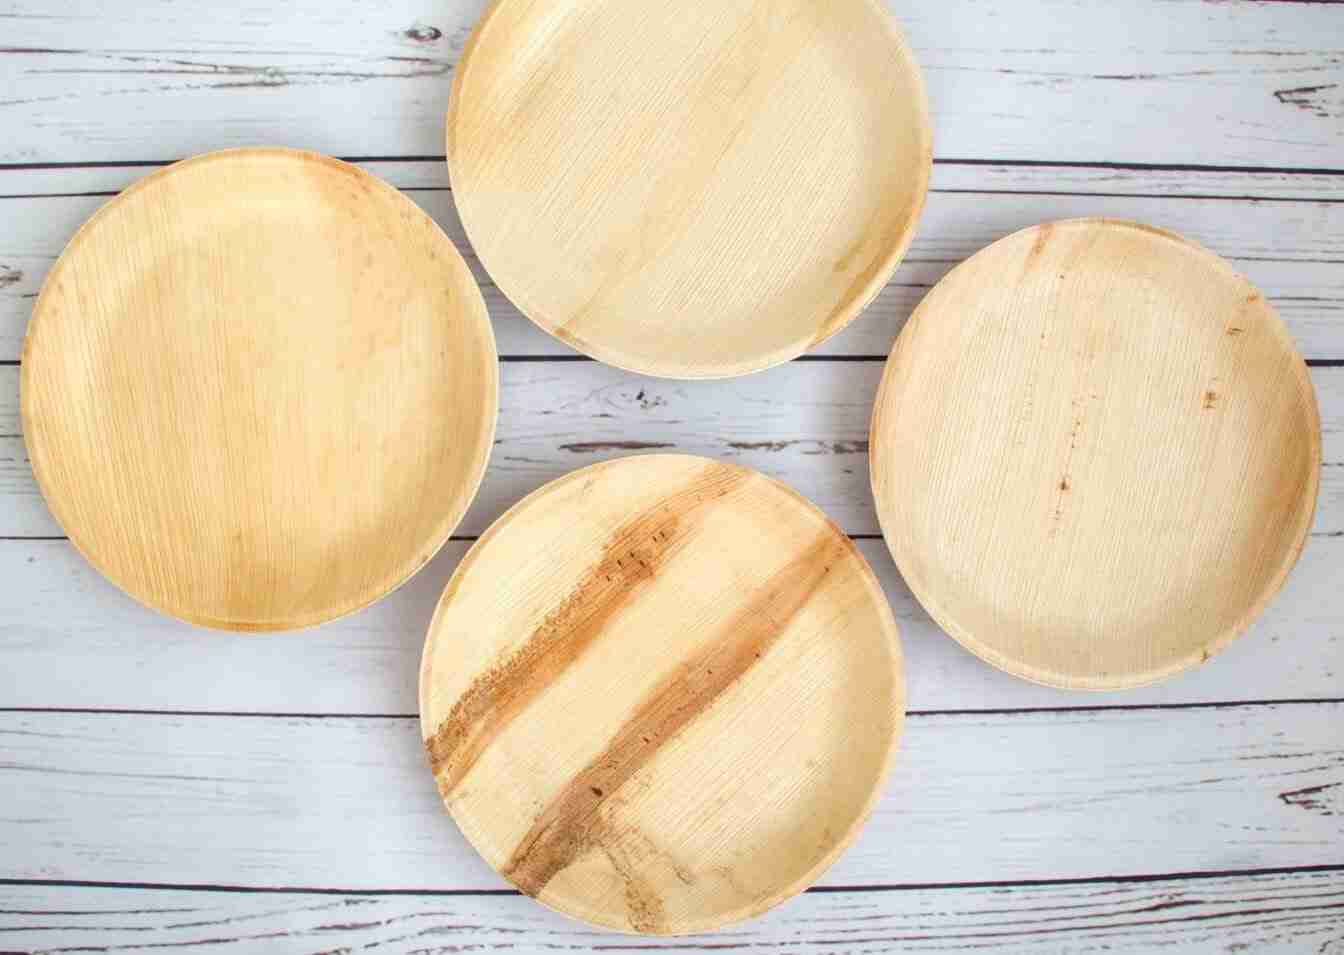 Leafily Palm Leaf Plates is bamboo dinnerware microwave safe